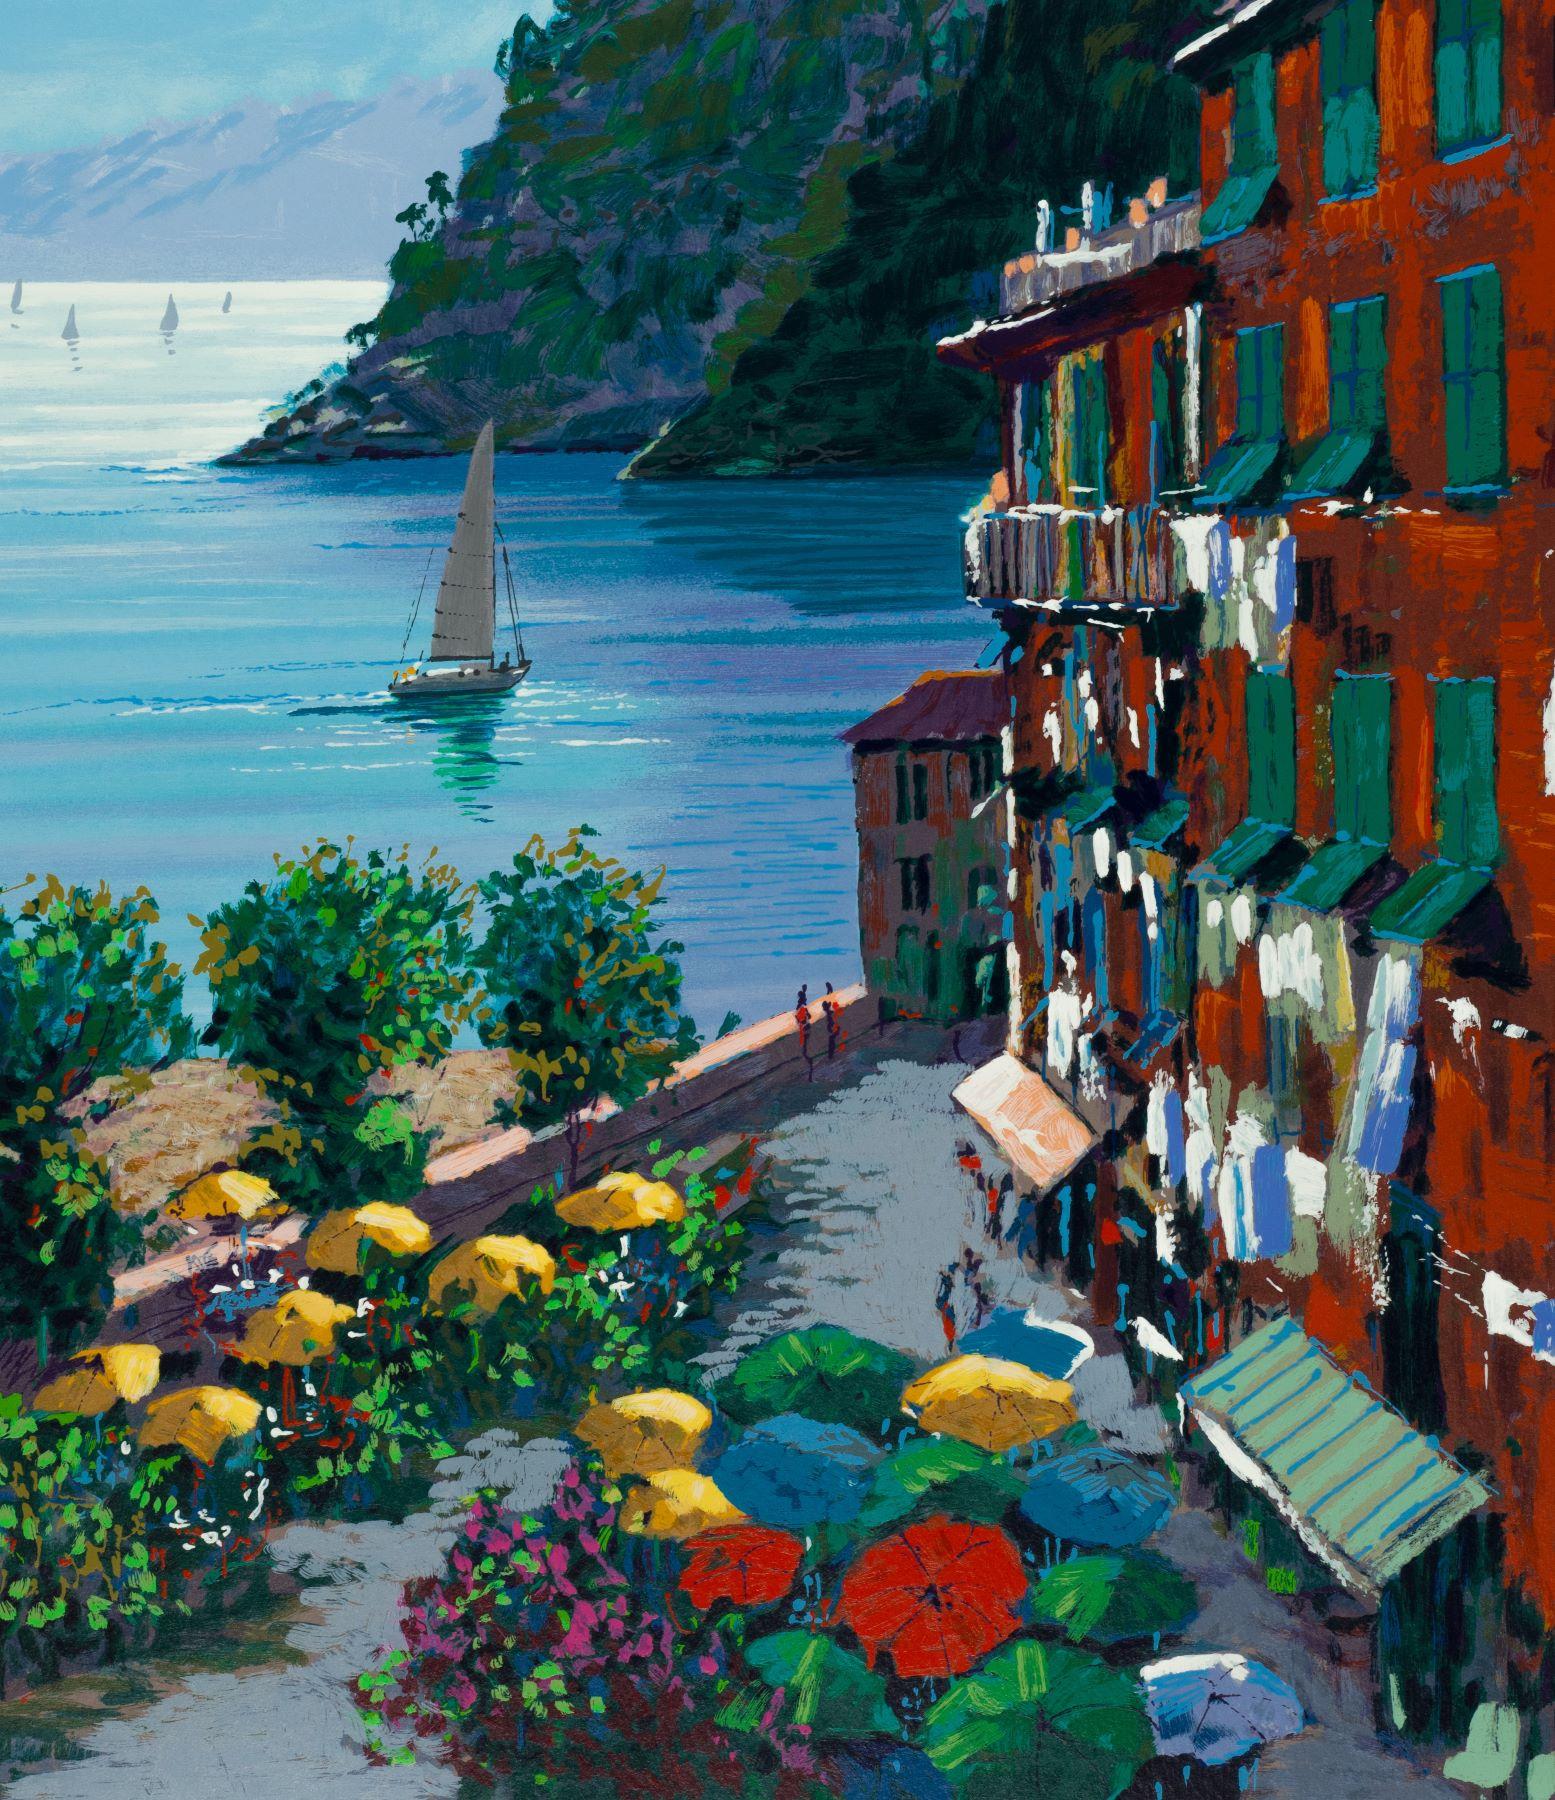 Cinqueterre is a serigraph on paper, image size 32 x 27 inches, signed ‘Kerry Hallam’ lower right and numbered lower left. From the edition of 500, numbered XXXIX/L (there were also 200 Arabic plus 250 on canvas). Framed in a gold-tone, oak-leaf